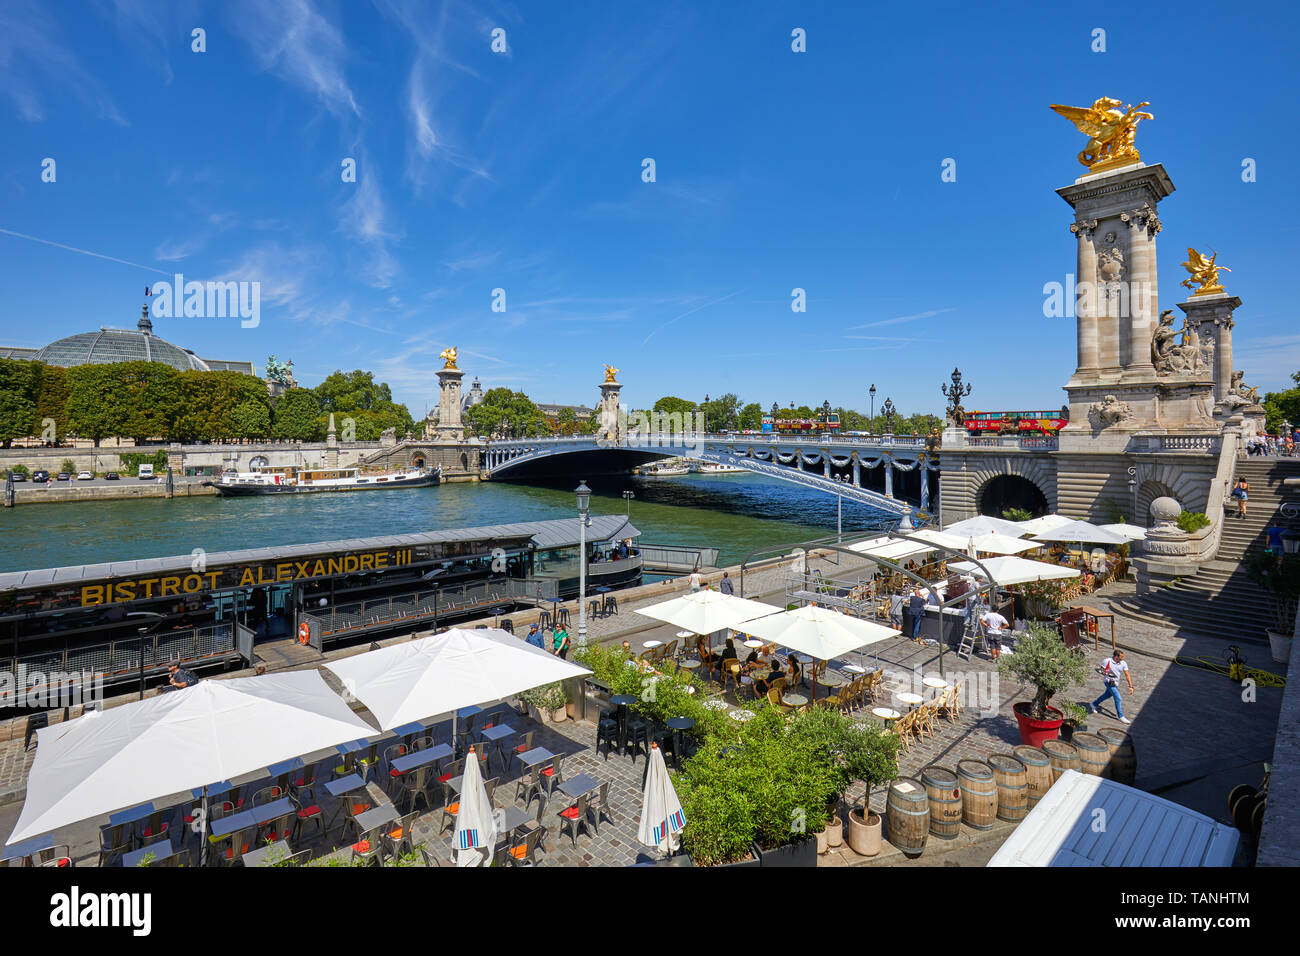 PARIS, FRANCE - JULY 21, 2017: Alexandre III bridge with people and tourists and cafe in docks area in a sunny summer day, blue sky in Paris, France. Stock Photo